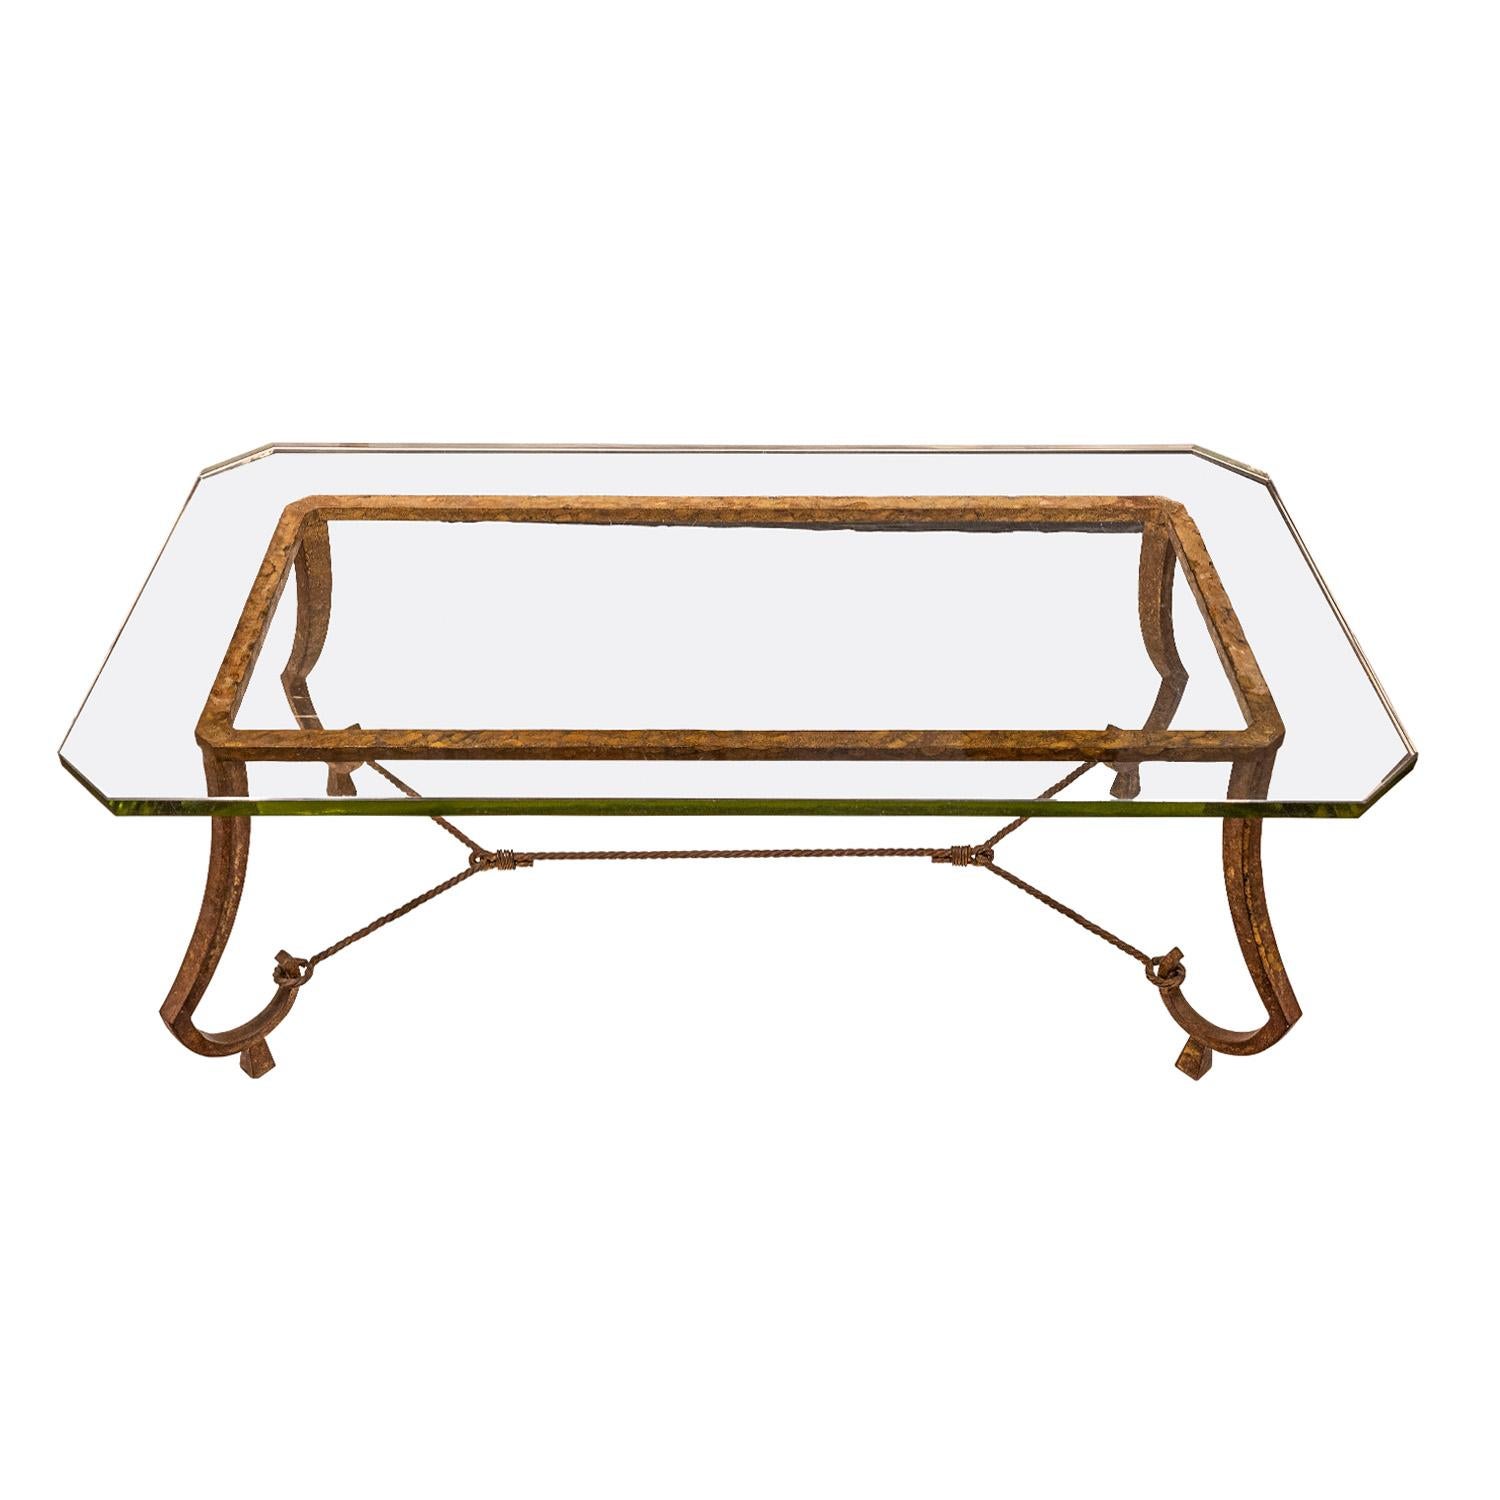 Artisan coffee table, gilt wrought iron with original glass top, by Maison Ramsay, France 1940's. This table is beautifully made and is very chic.